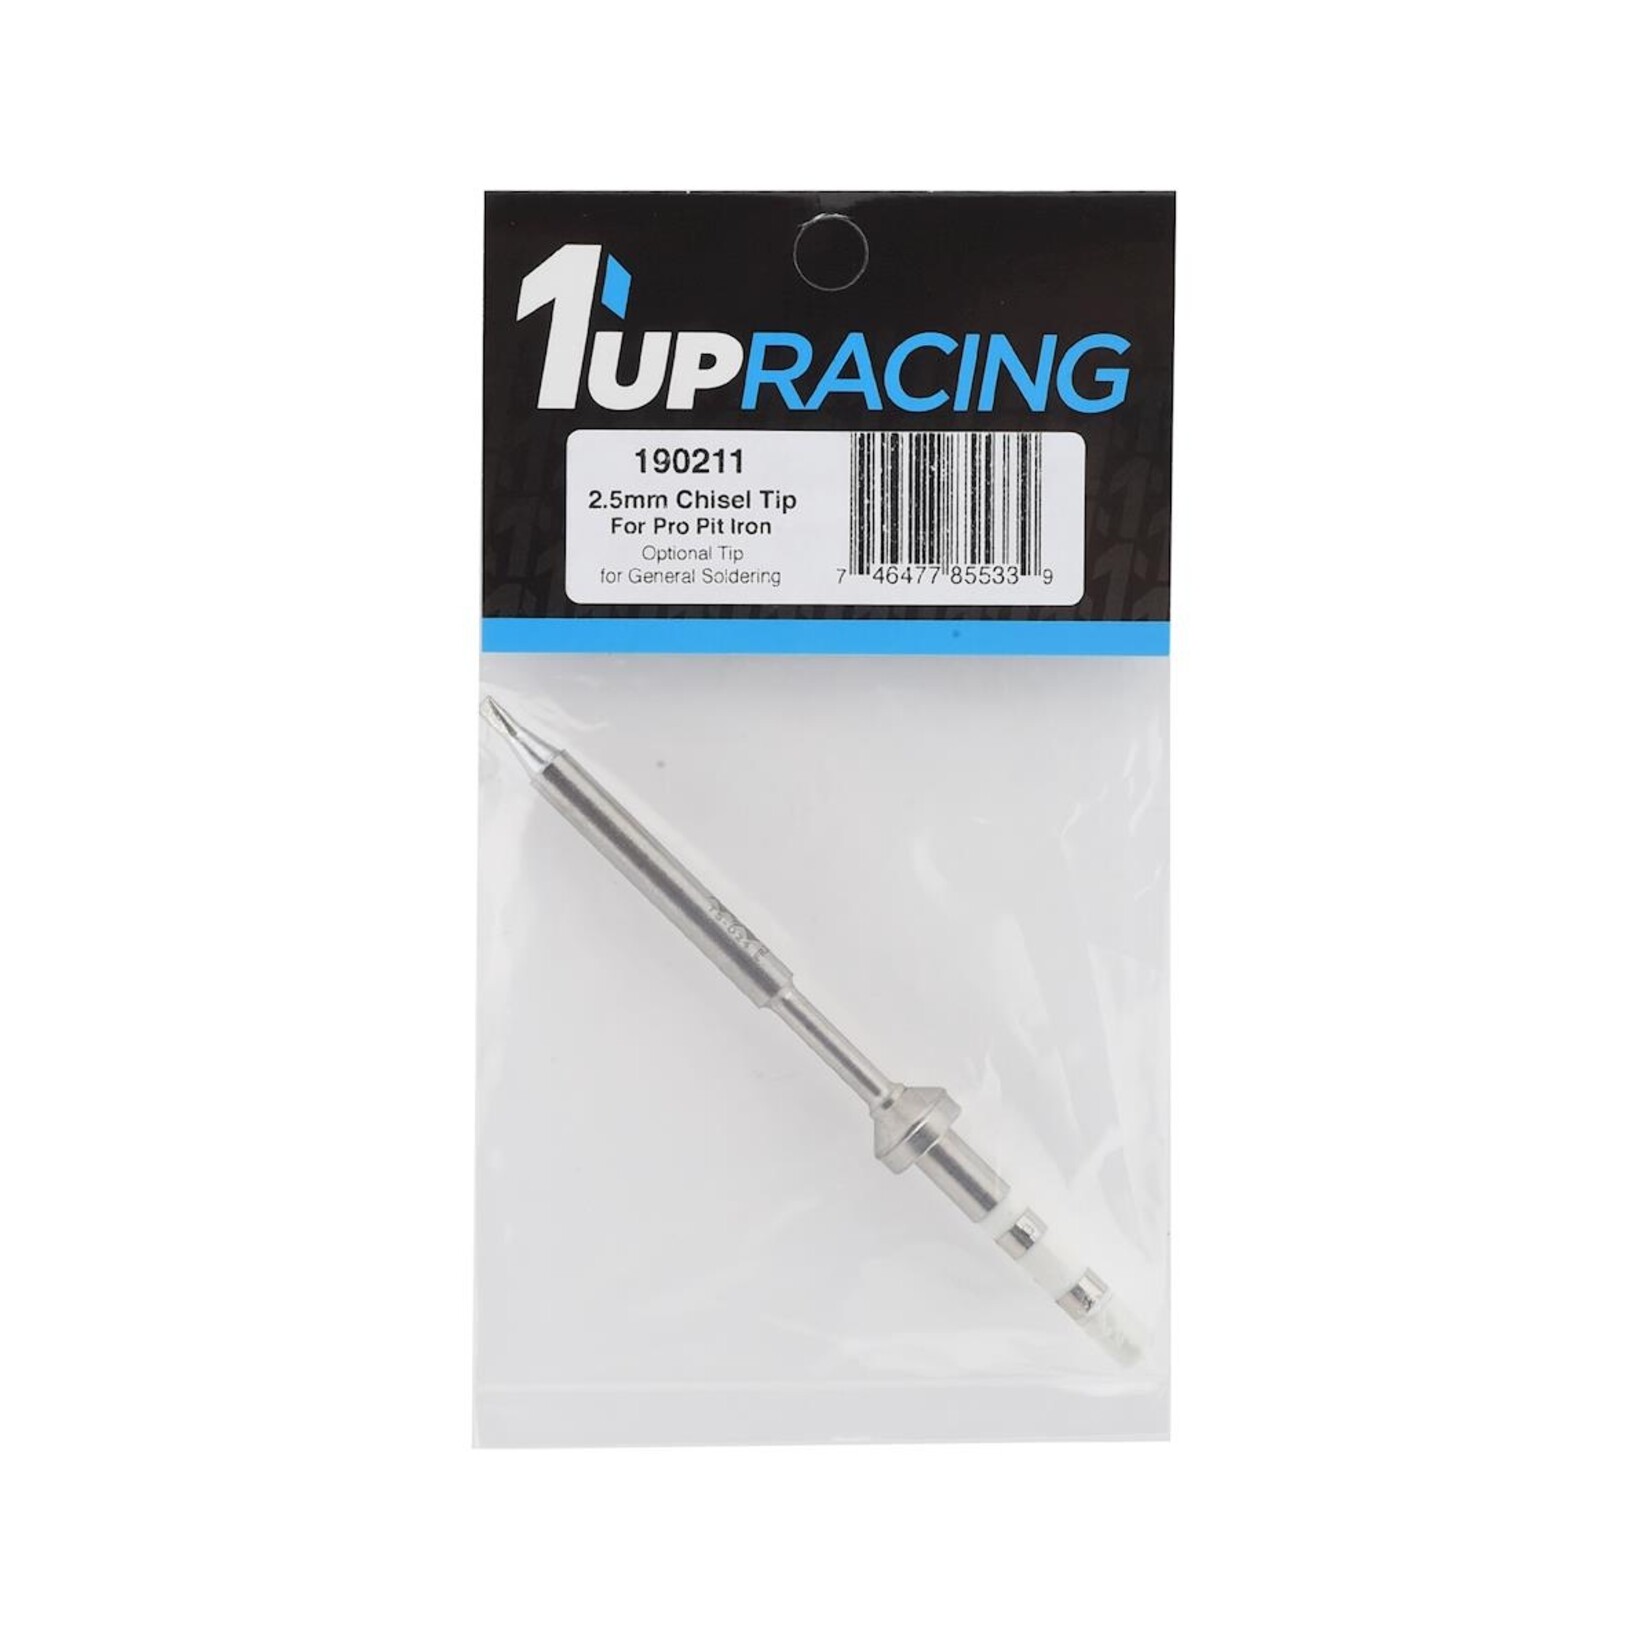 1UP Racing 1UP Racing Pro Pit Soldering Iron 2.5mm Tip #190211